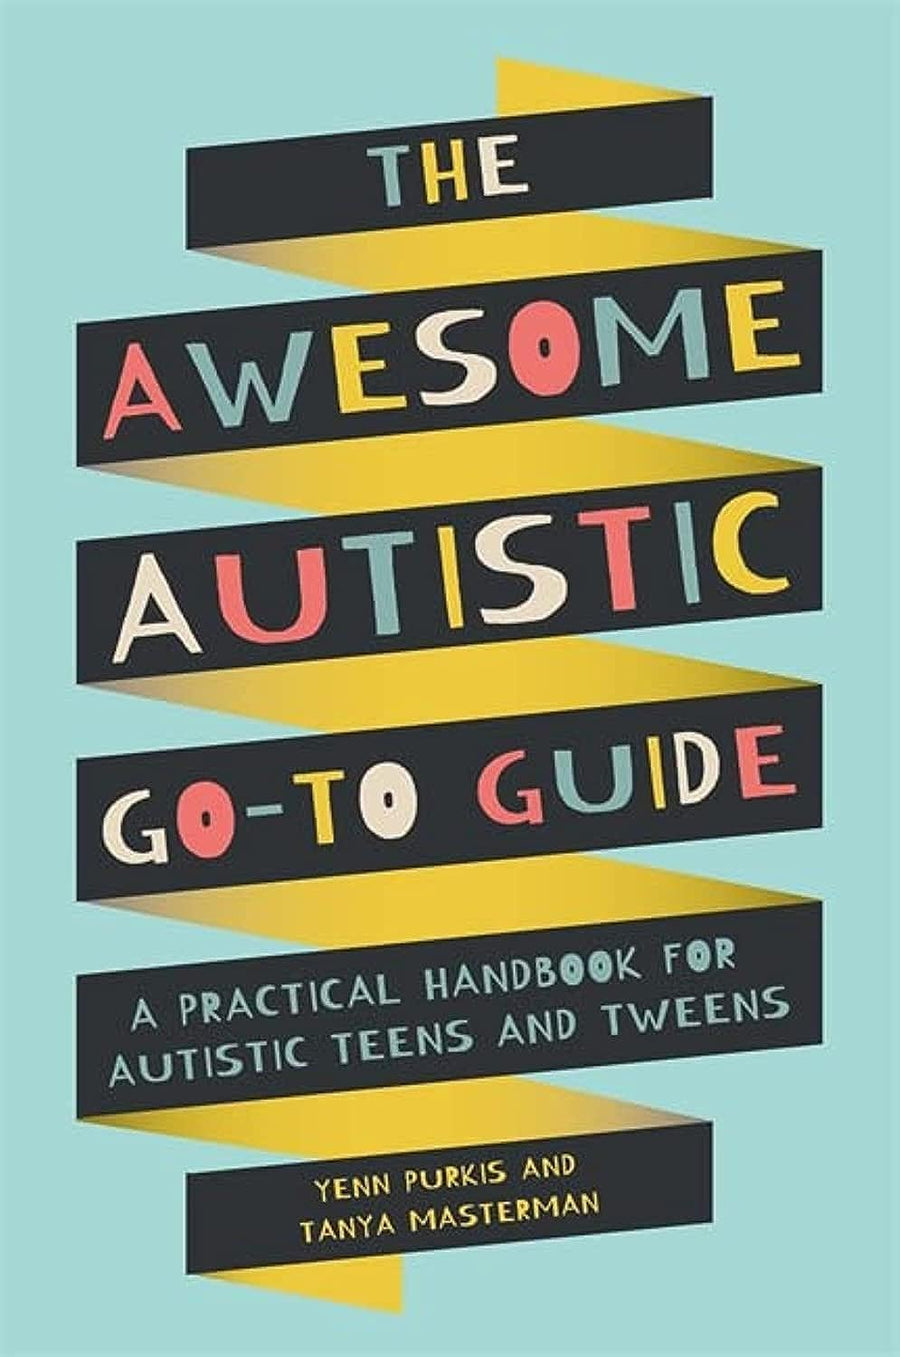 Awesome Autistic Go-To Guide: A Practical Handbook for Autistic Teens and Tweens